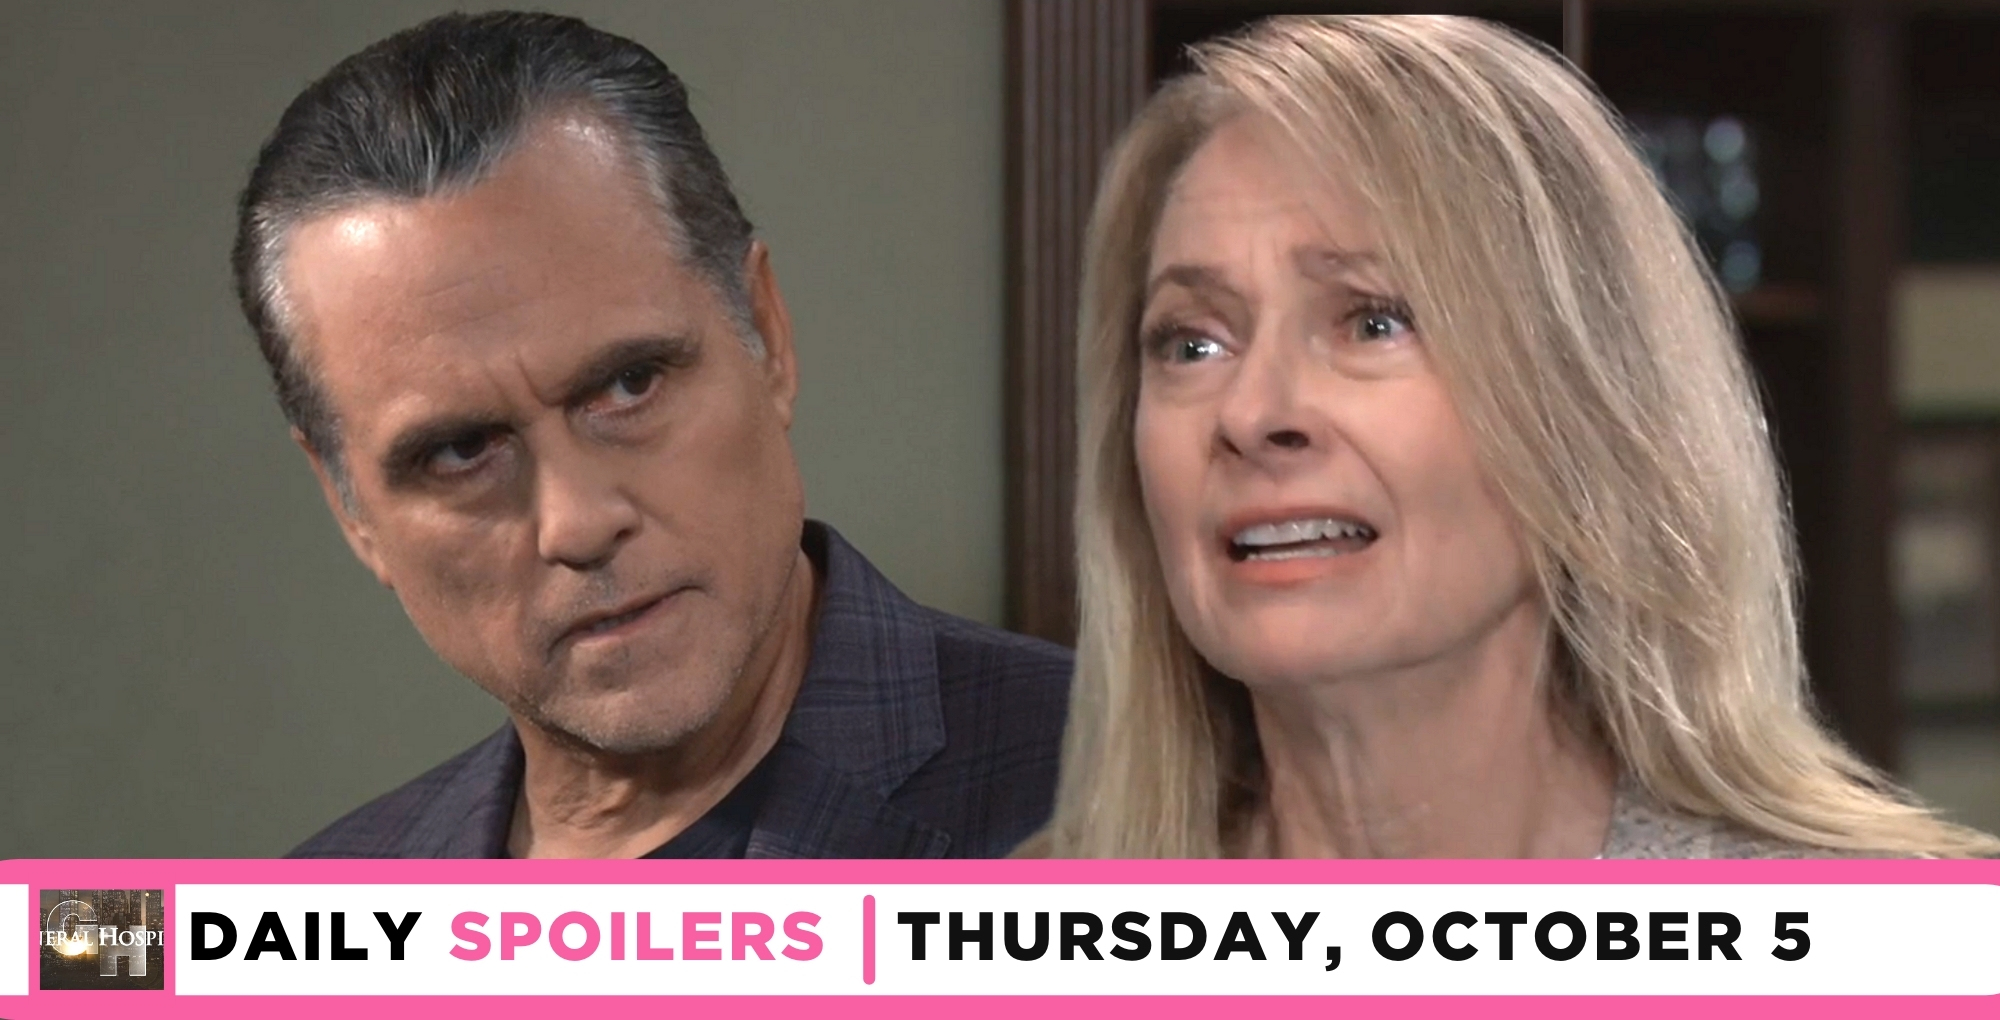 General Hospital Spoilers Sonny Is Ready To Take Care Of Gladys